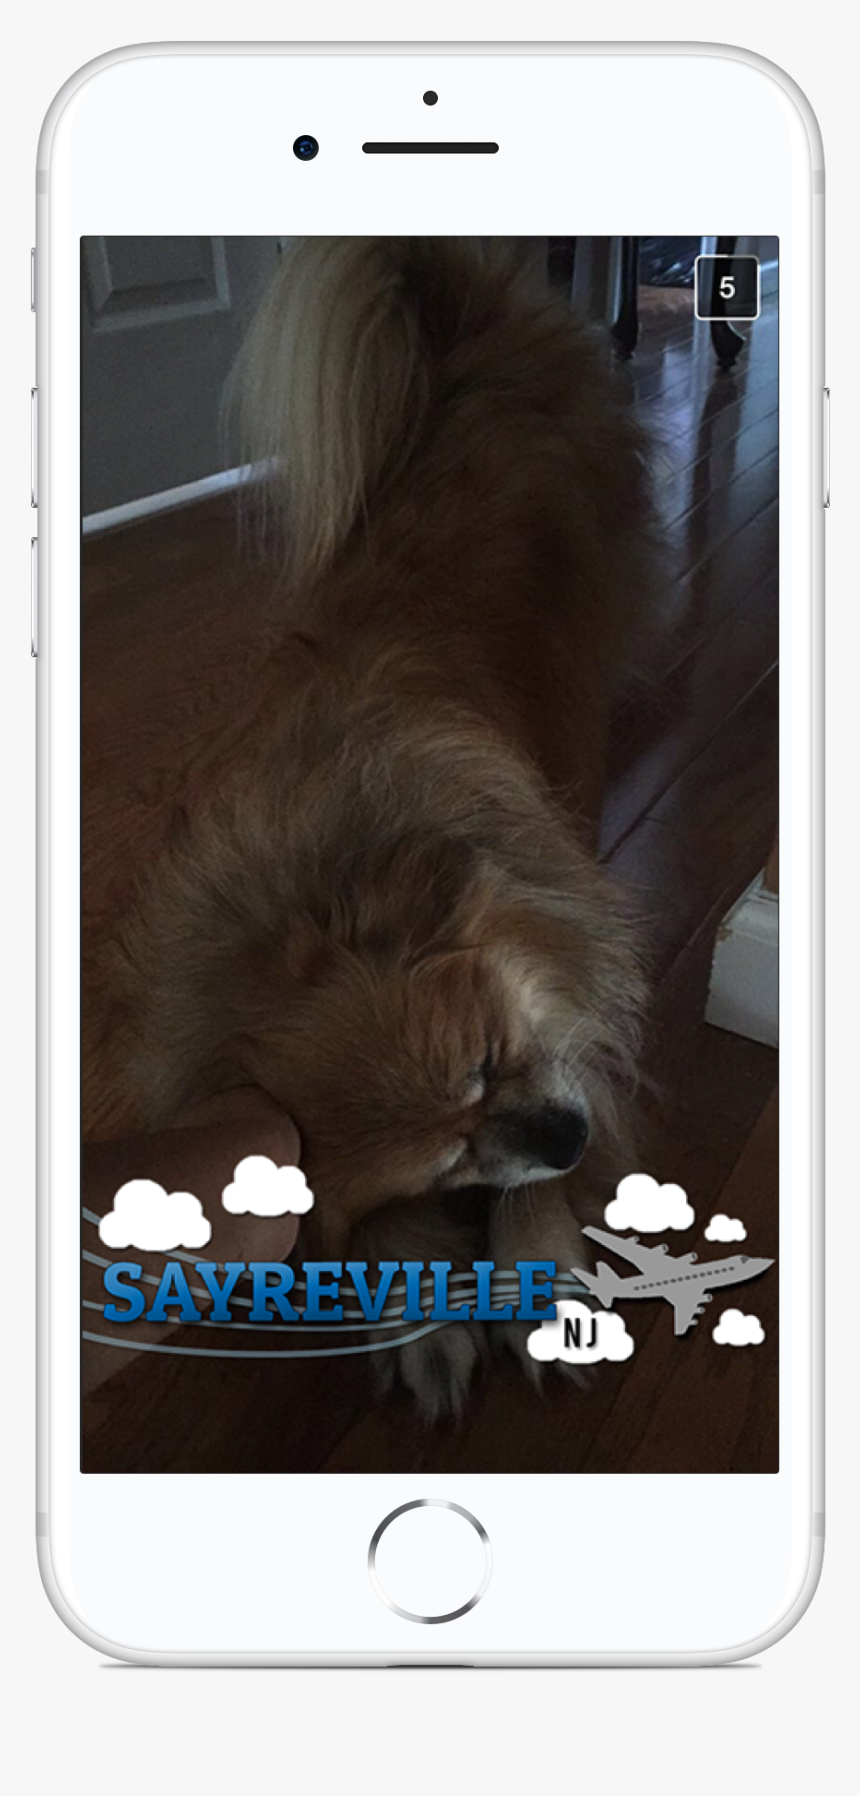 Sayrevillegeofilter01-01 - Small Greek Domestic Dog, HD Png Download, Free Download